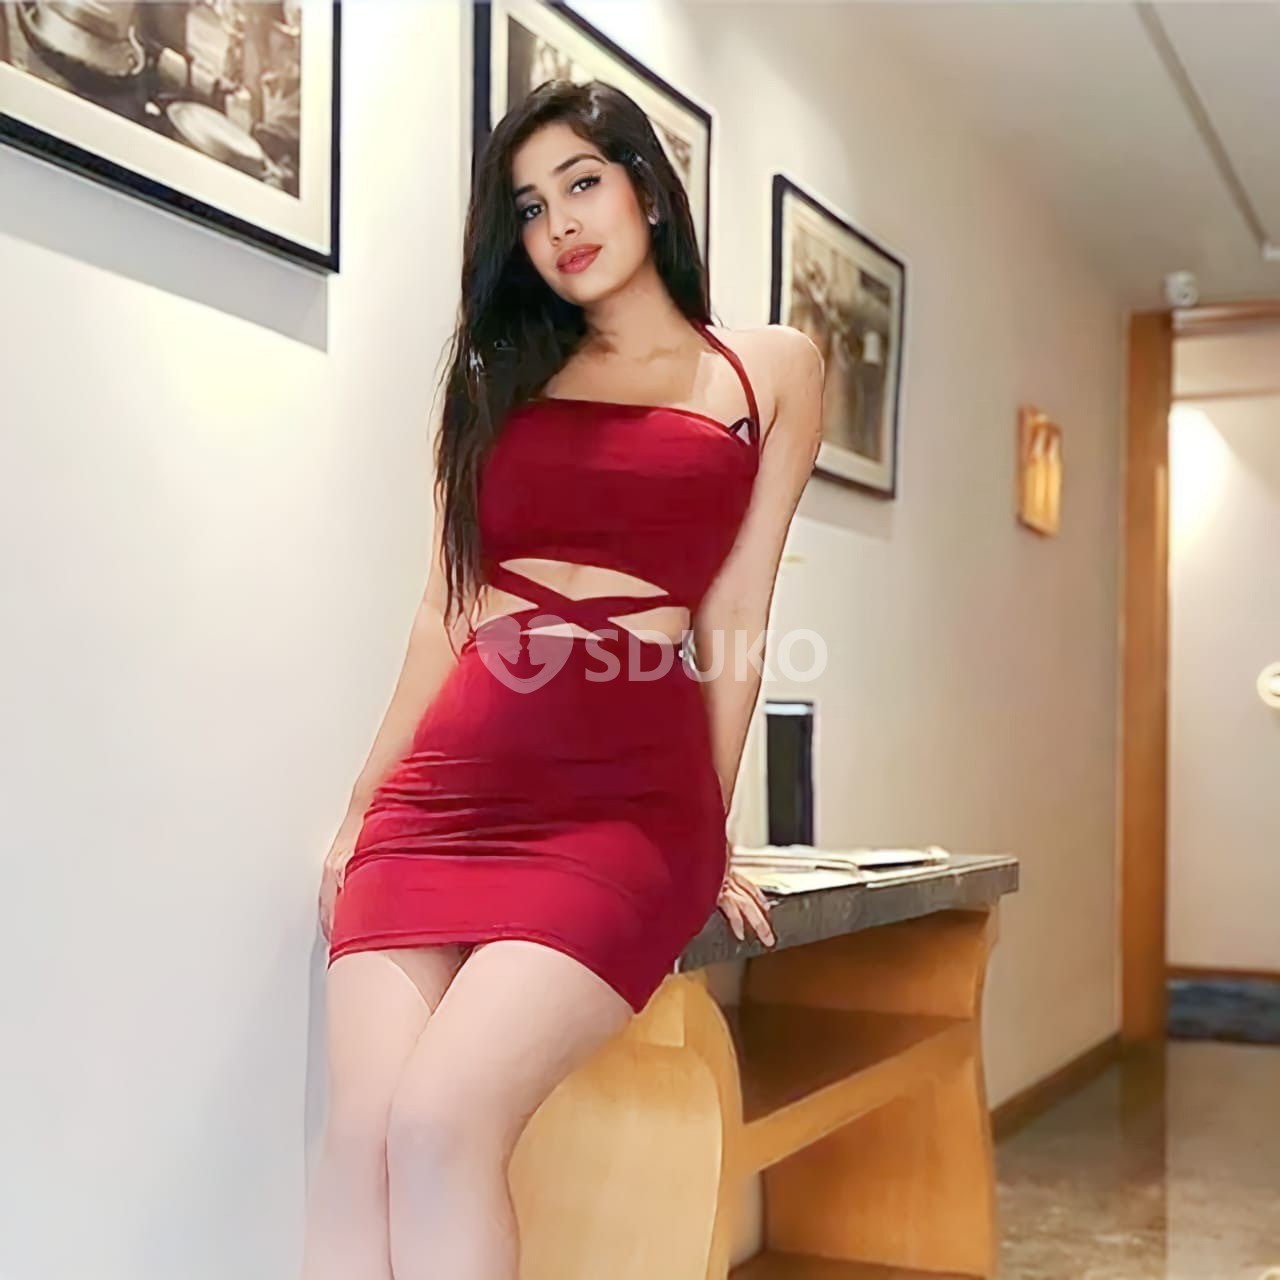 KUKATPALLY 🌟BEST CALL GIRL INDEPENDENT ESCORT SERVICE IN LOW BUDGET